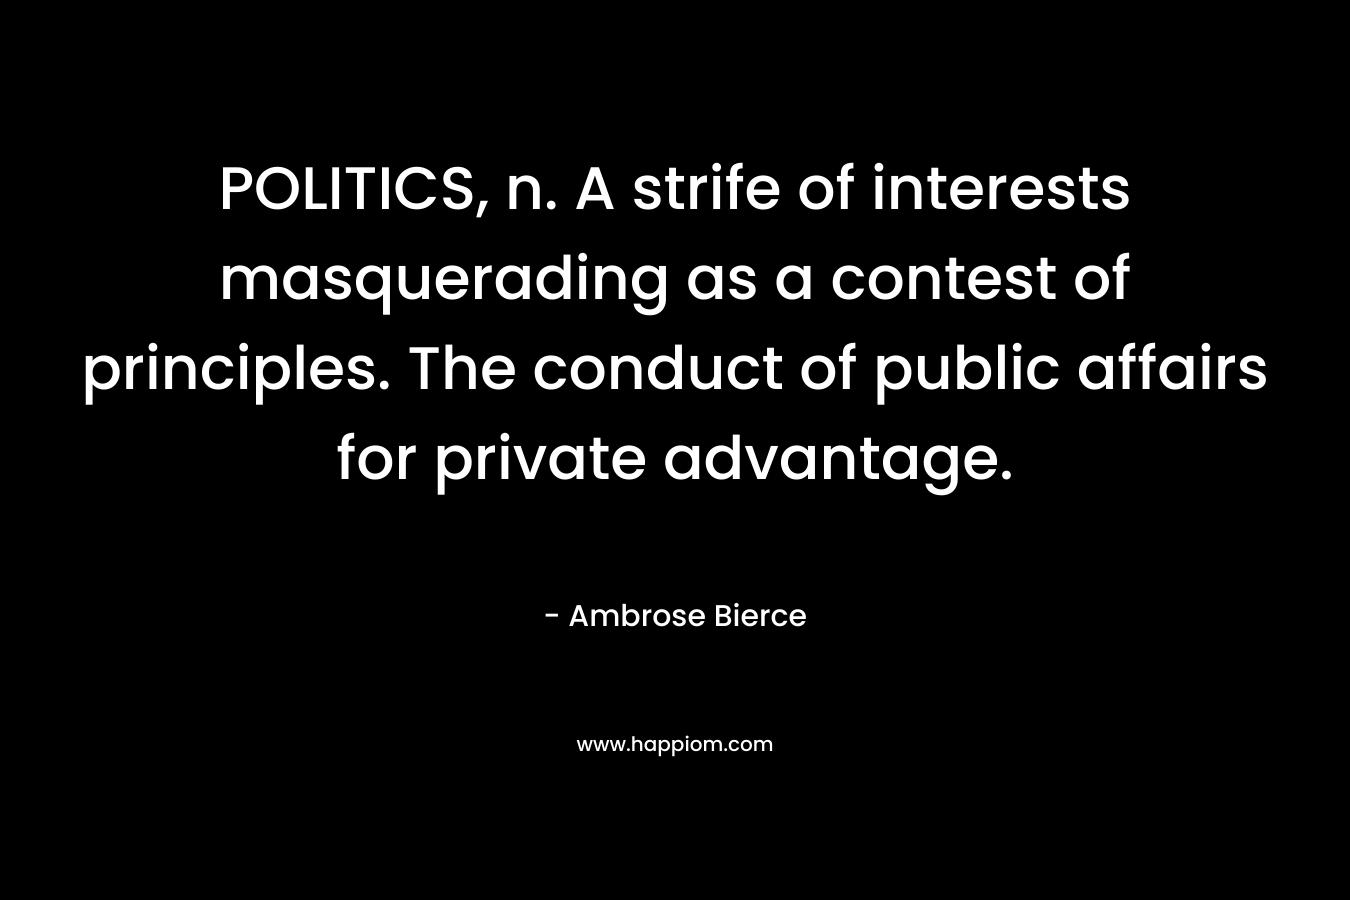 POLITICS, n. A strife of interests masquerading as a contest of principles. The conduct of public affairs for private advantage. – Ambrose Bierce